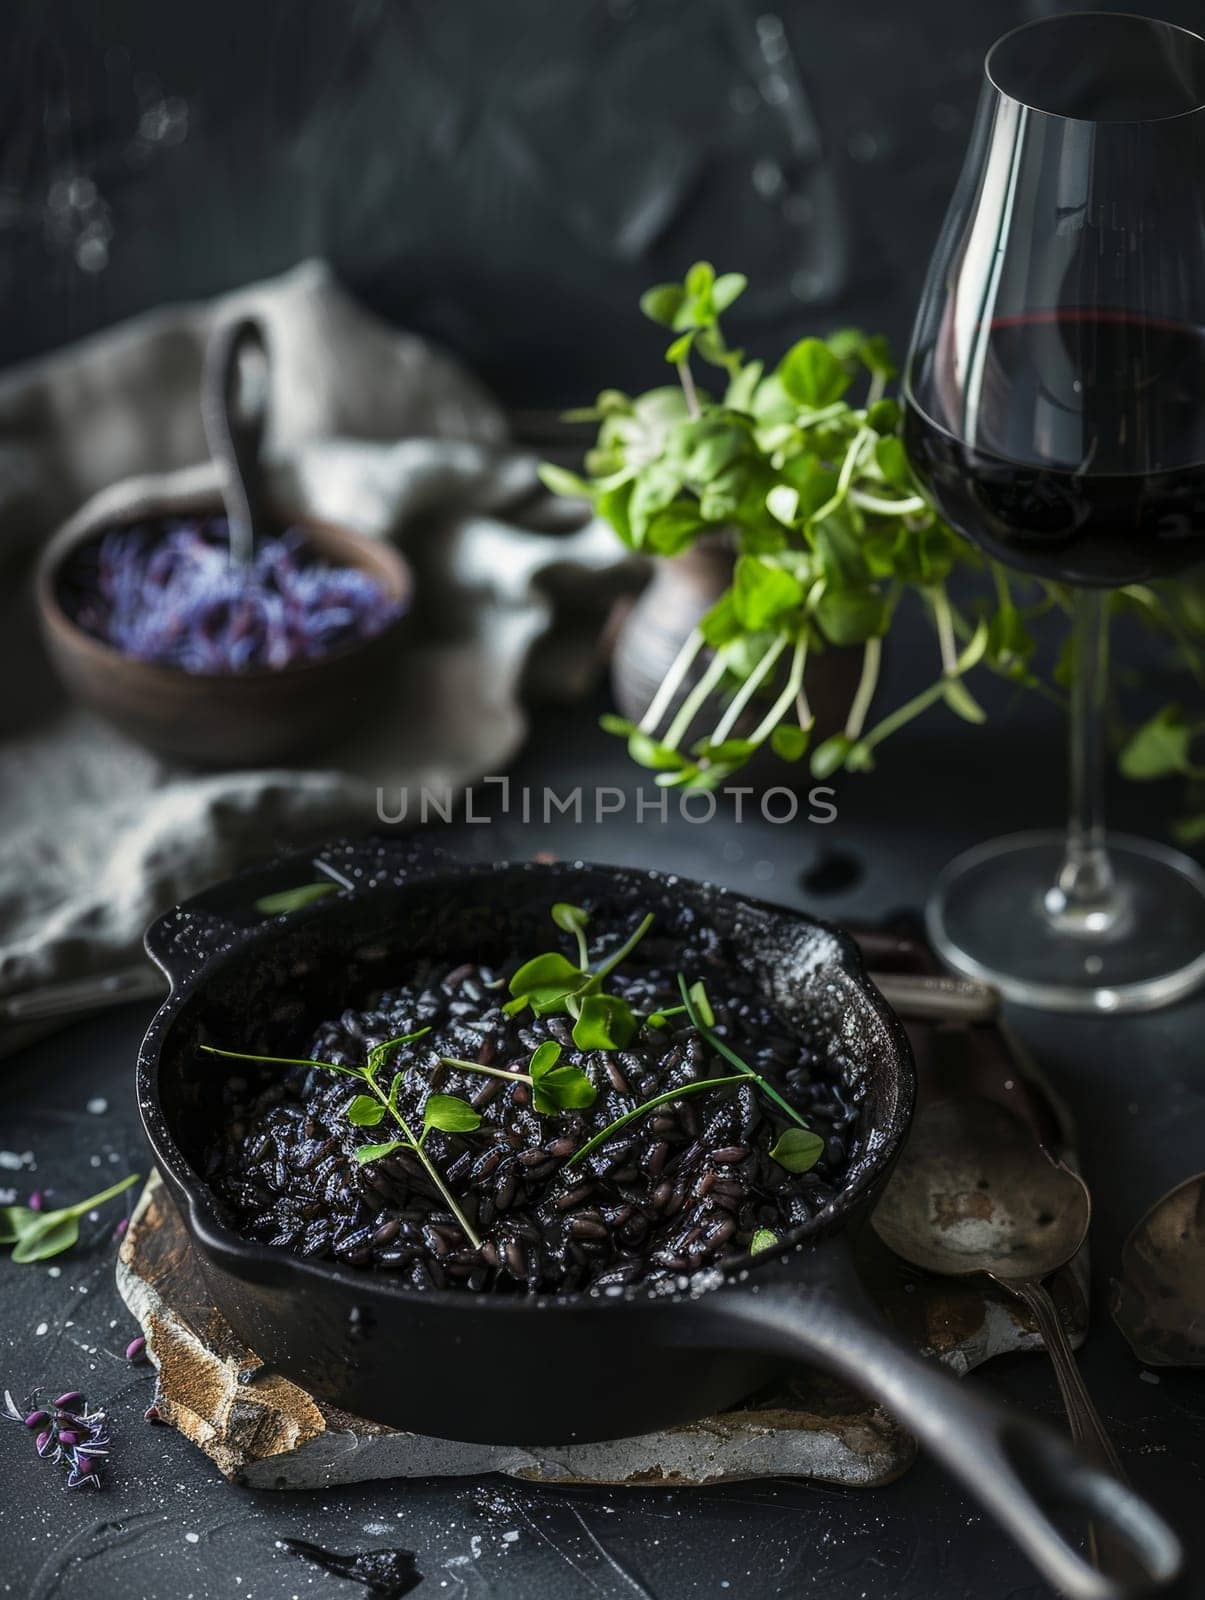 Croatian crni rizot, a traditional black risotto made with squid ink, served in a skillet. This distinctive ethnic dish showcases the unique flavors and cooking traditions of Croatian cuisine